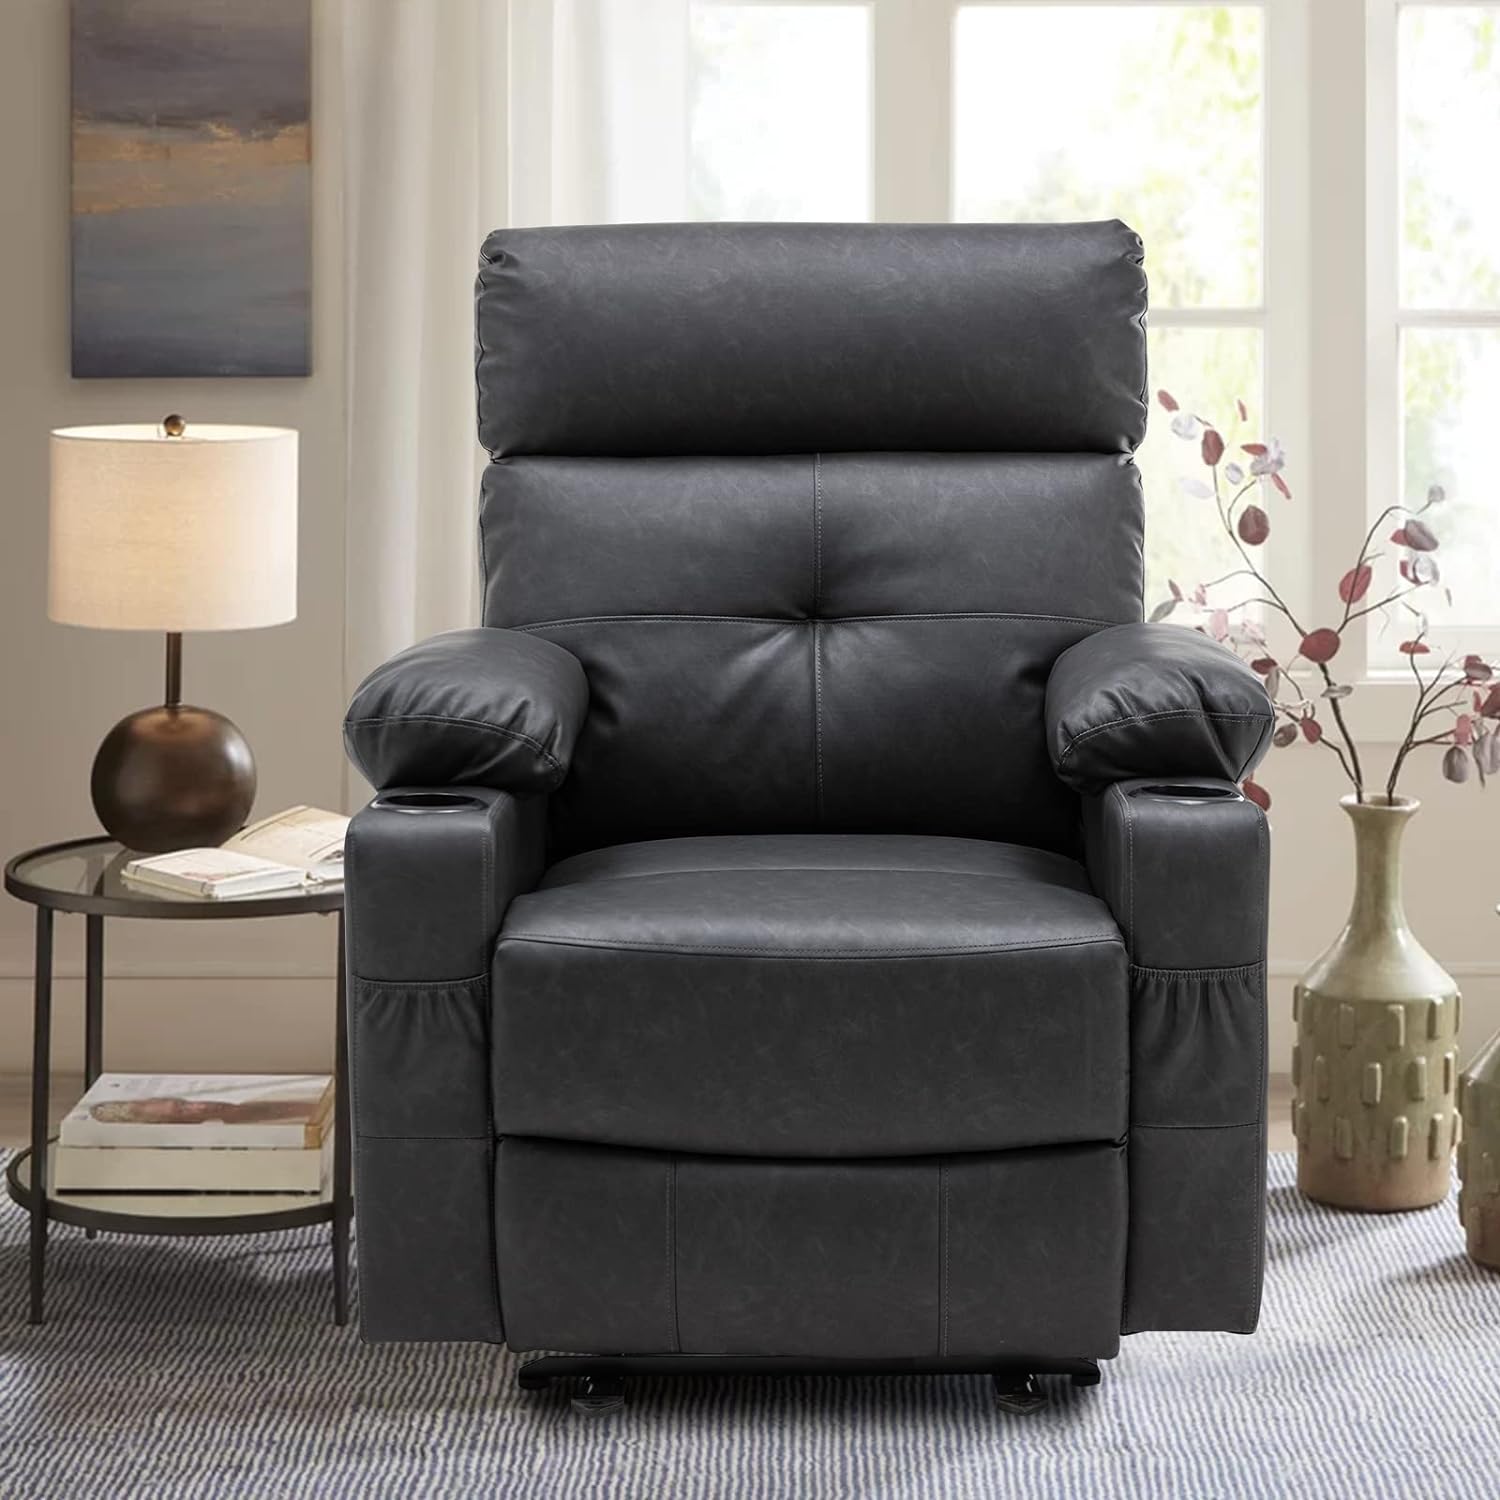 Electric Recliner Chairs nrog Extended Footrest